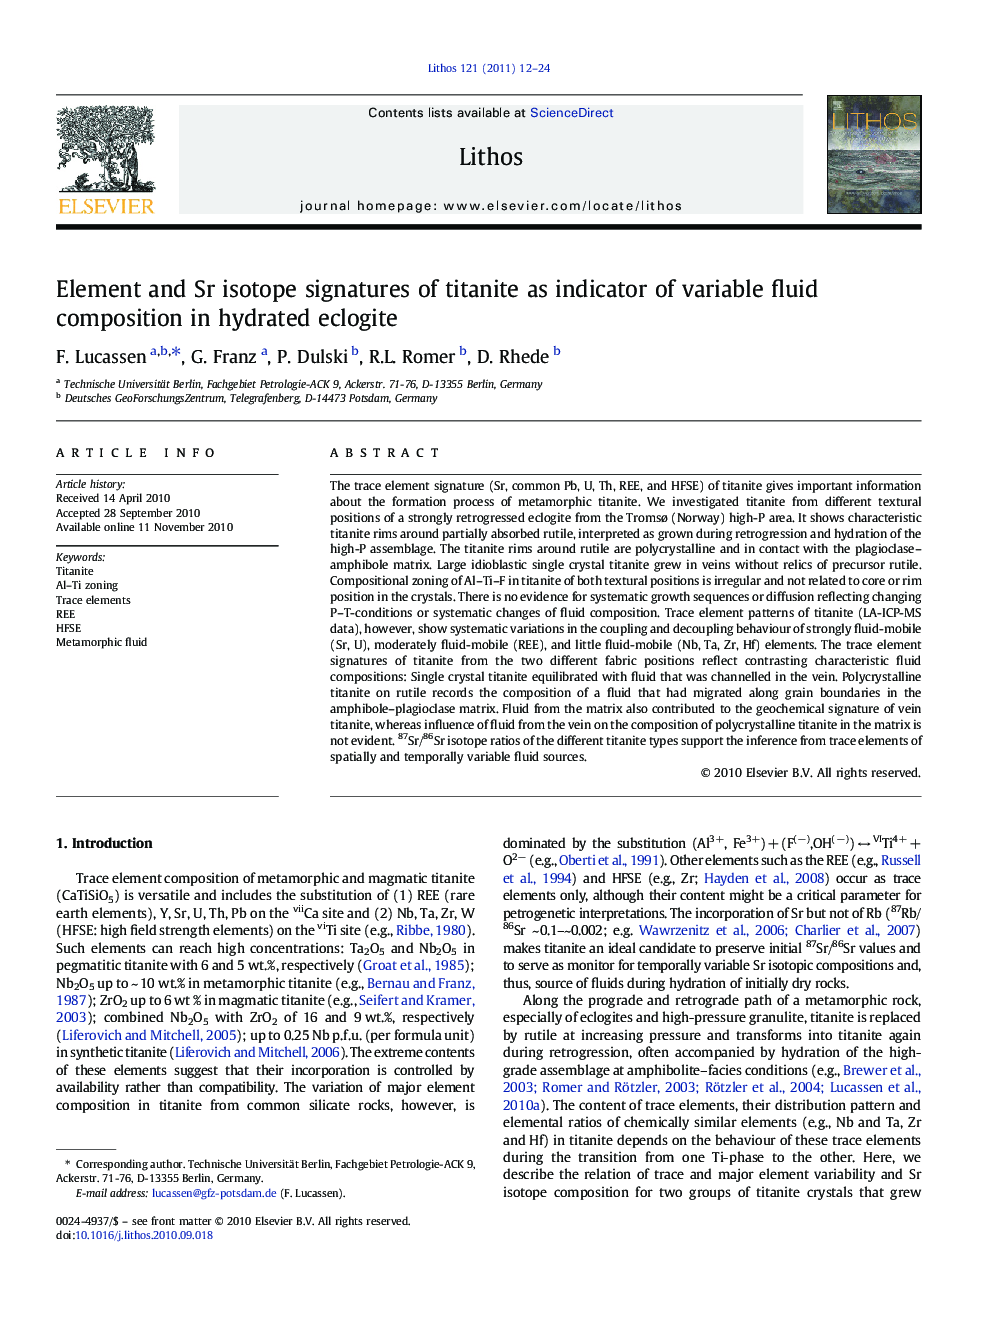 Element and Sr isotope signatures of titanite as indicator of variable fluid composition in hydrated eclogite